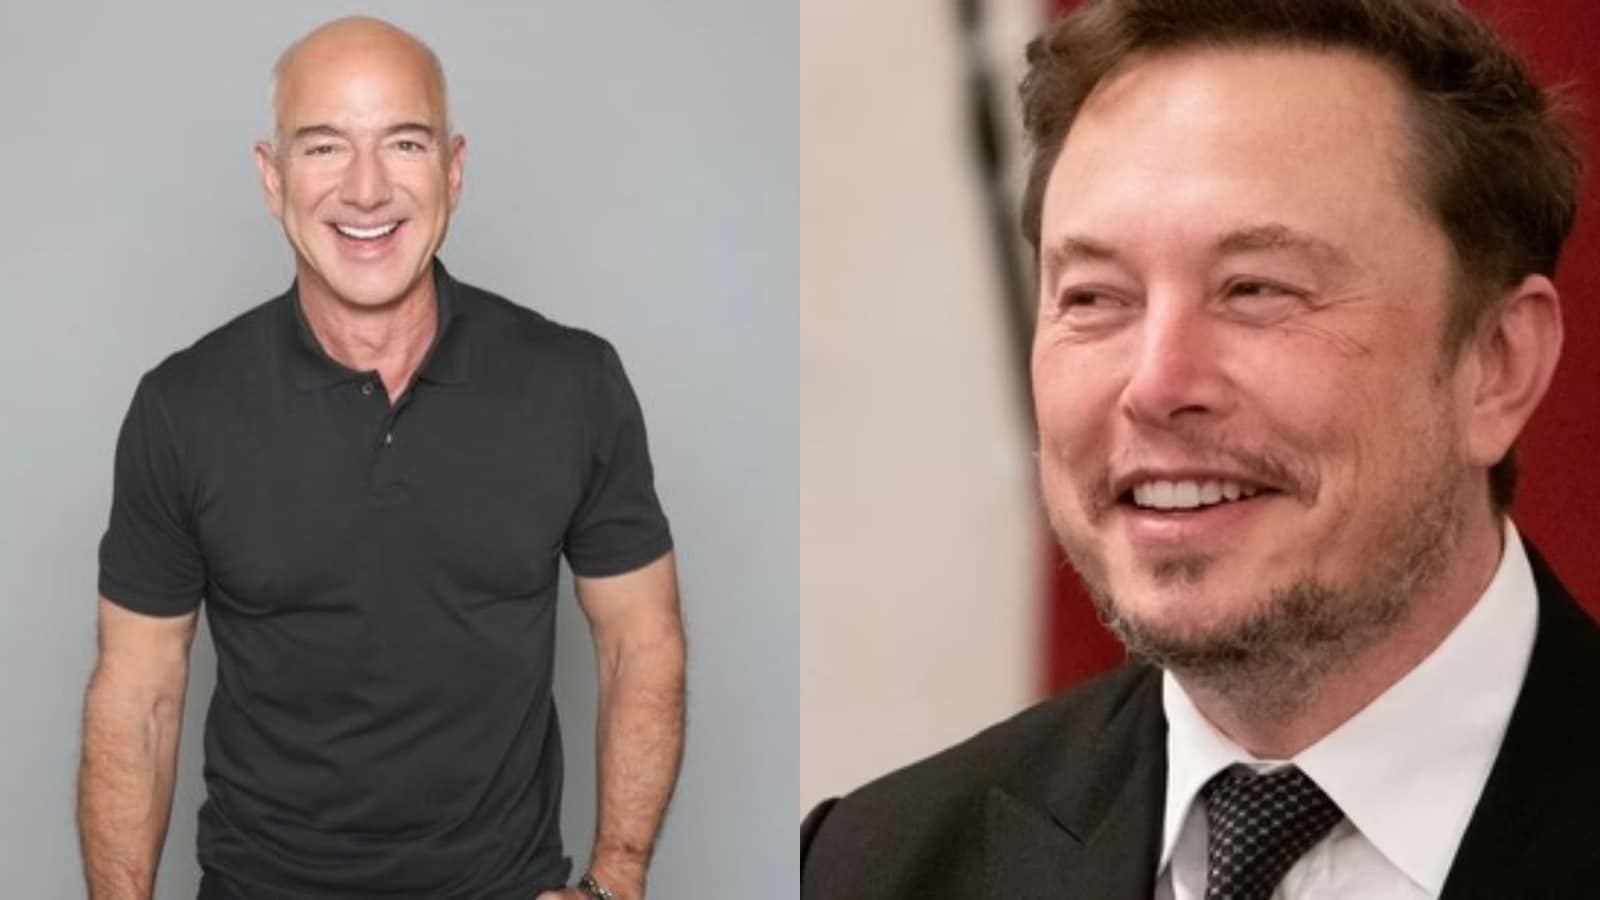 Elon Musk reacts to Jeff Bezos’ viral review of milk on Amazon